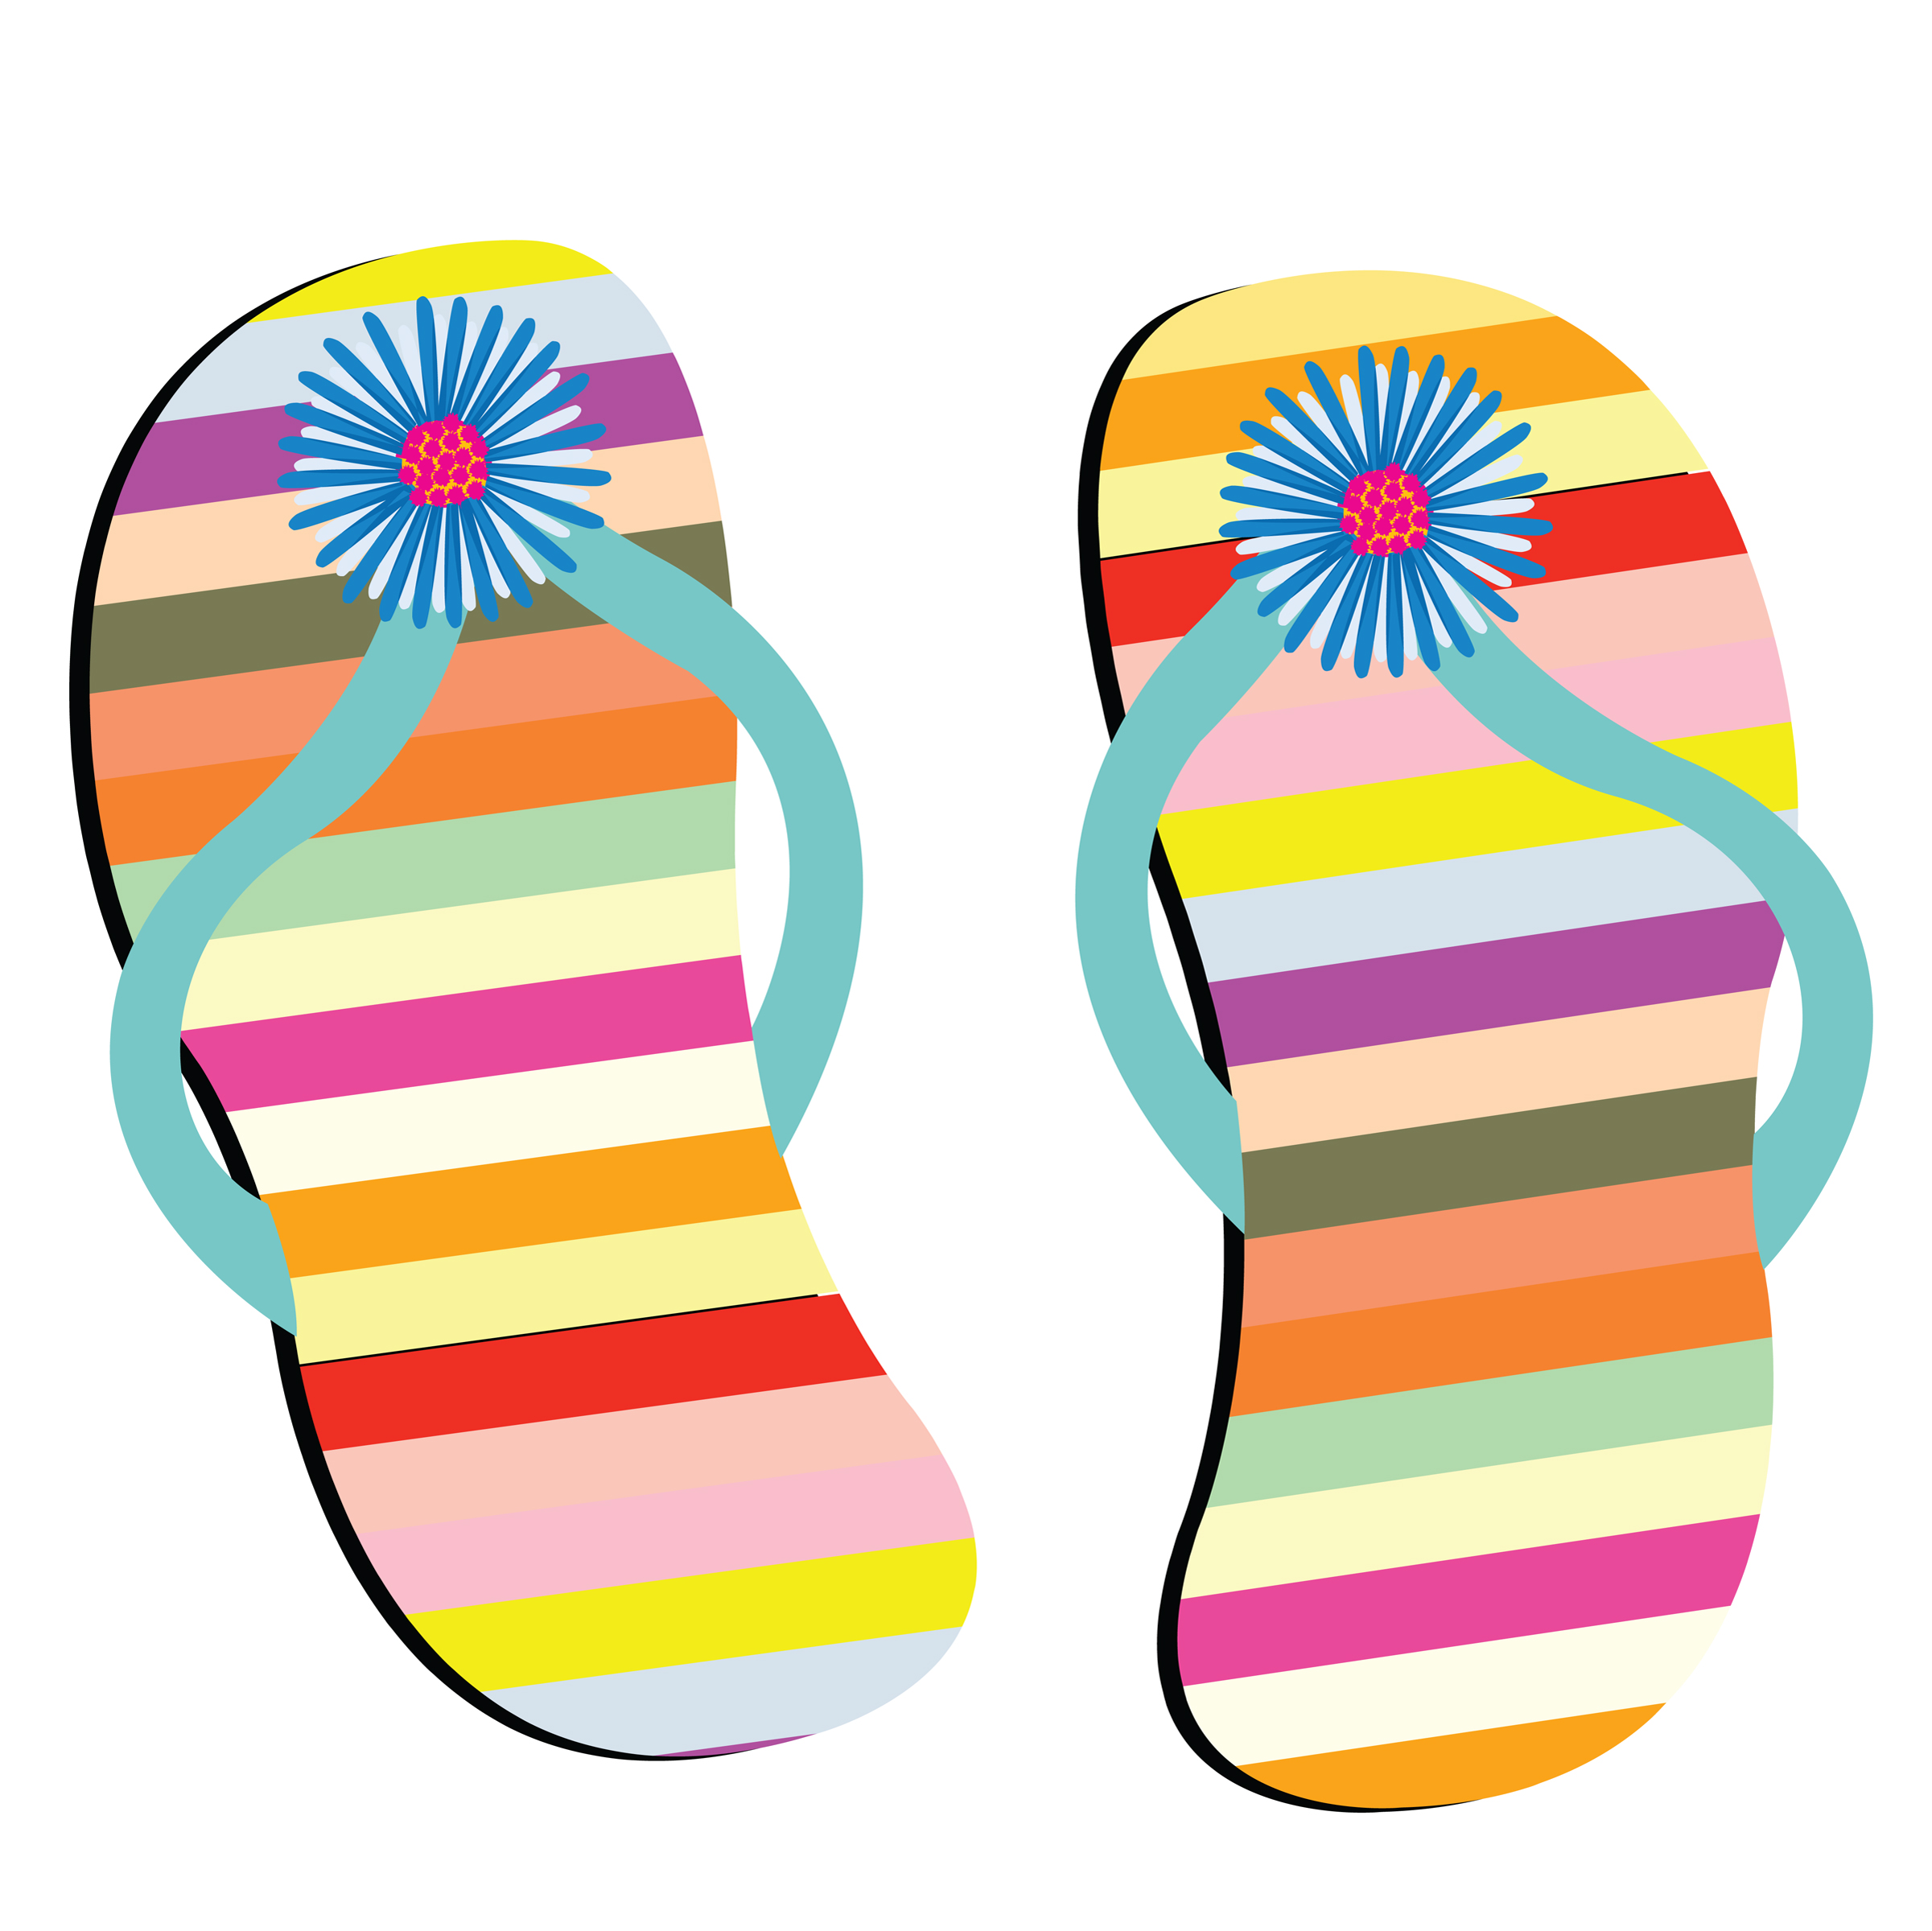 Free Beach Sandals Cliparts, Download Free Clip Art, Free